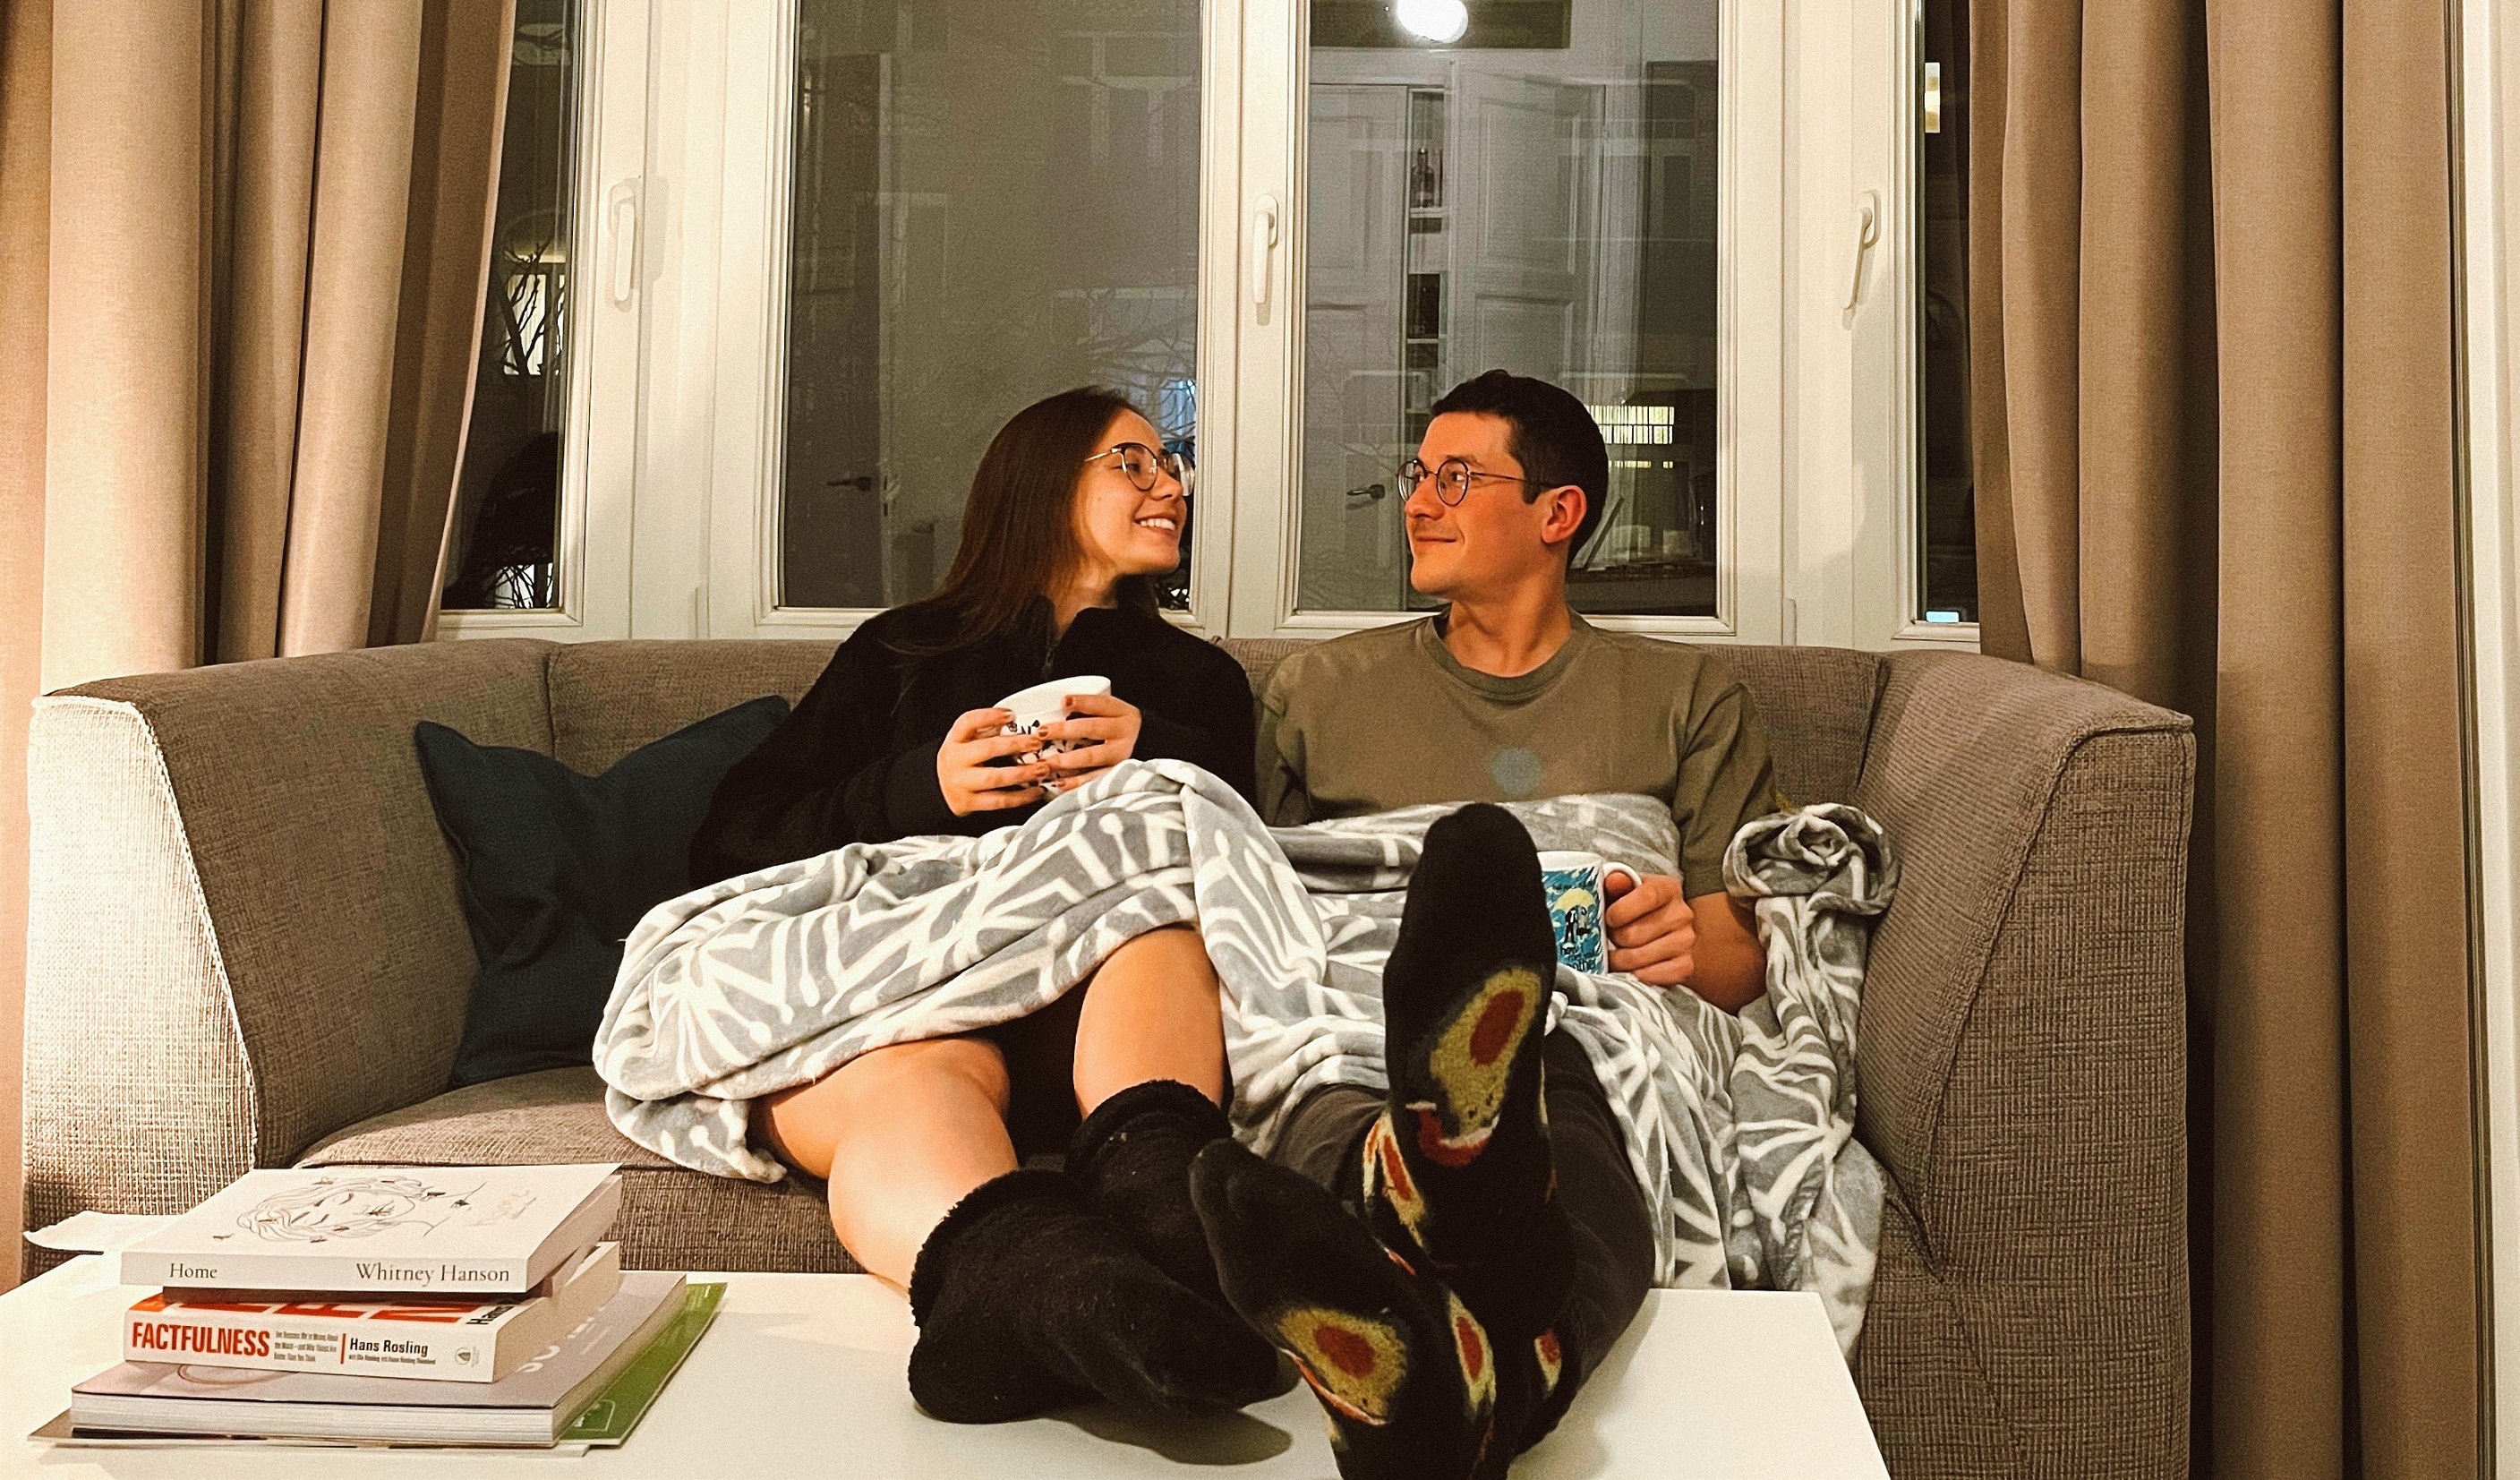 Lala and Nic sitting together on a couch. They are wrapped up in a gray and white blanket, with mugs, looking at each other. Their feet are propped up on a table, with some books on the side.